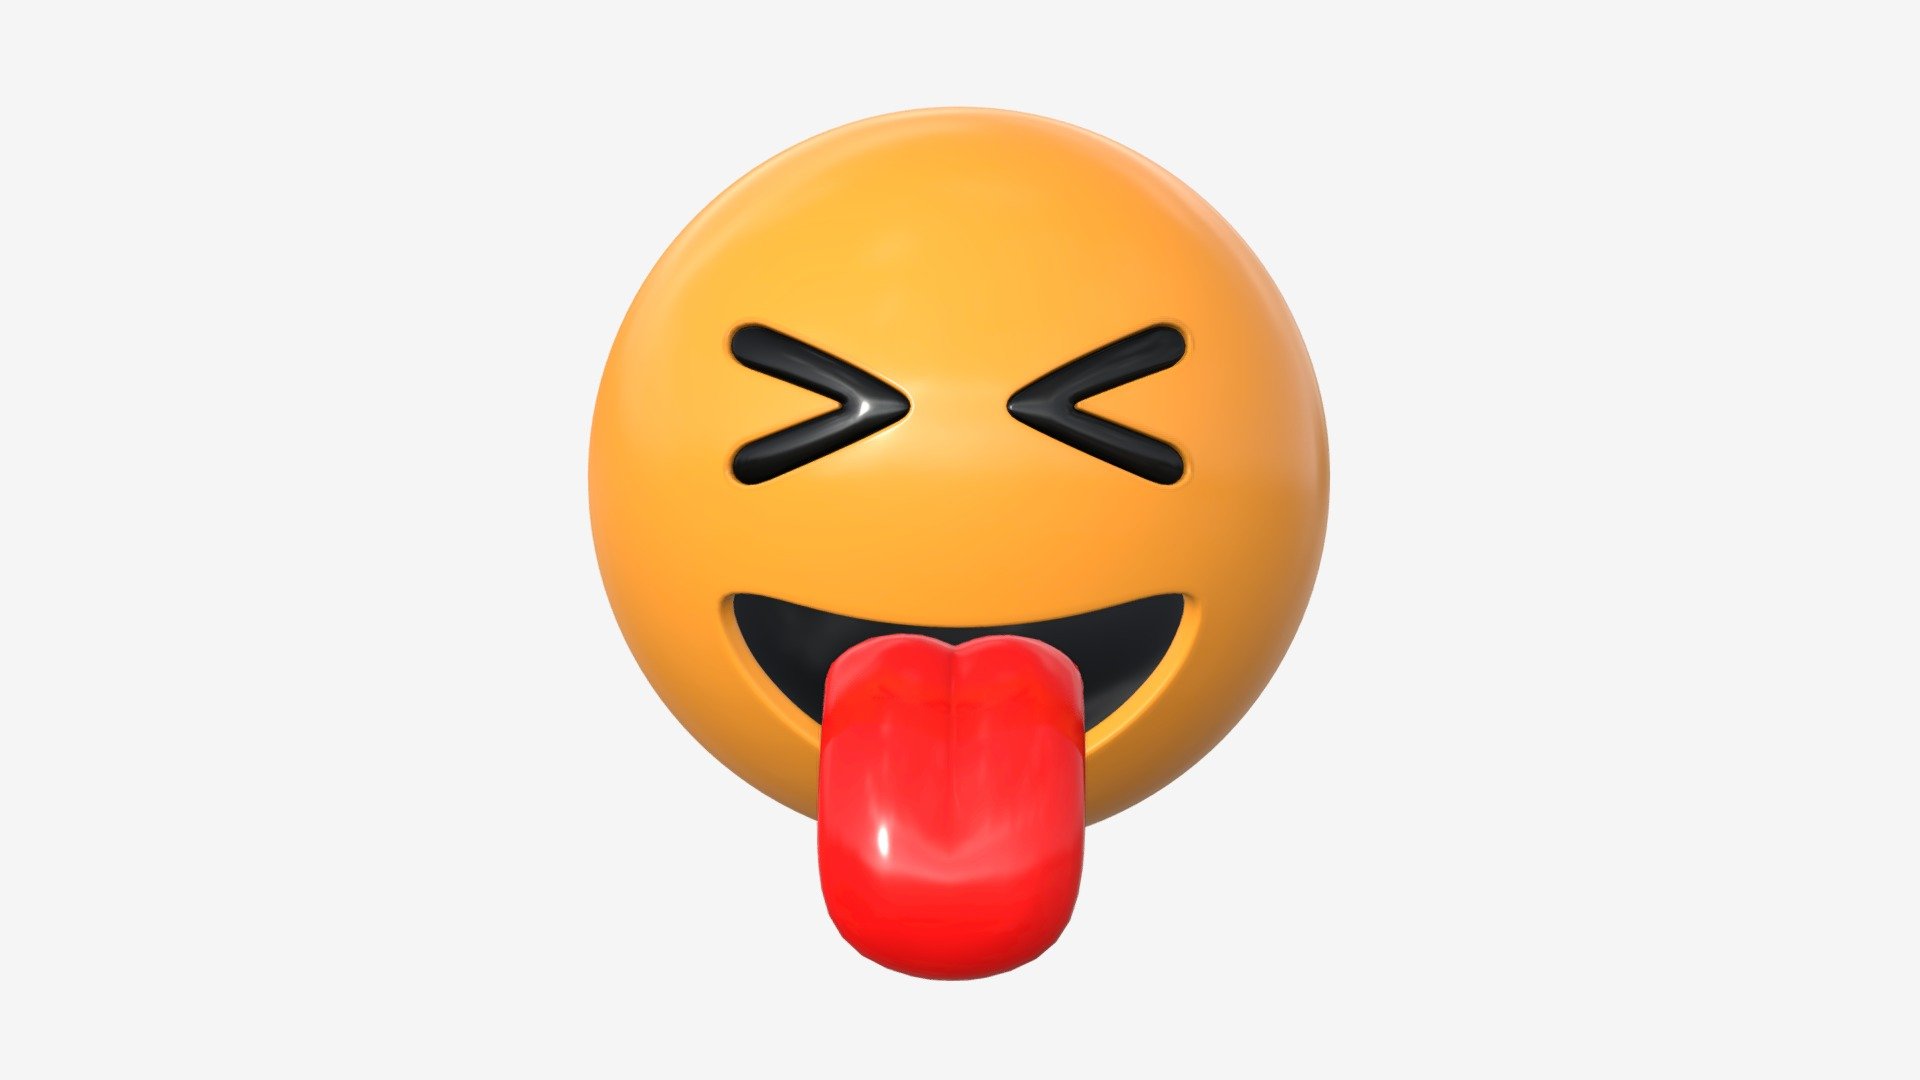 Emoji 025 Stuck-out tongue with closed eyes - Buy Royalty Free 3D model by HQ3DMOD (@AivisAstics) 3d model